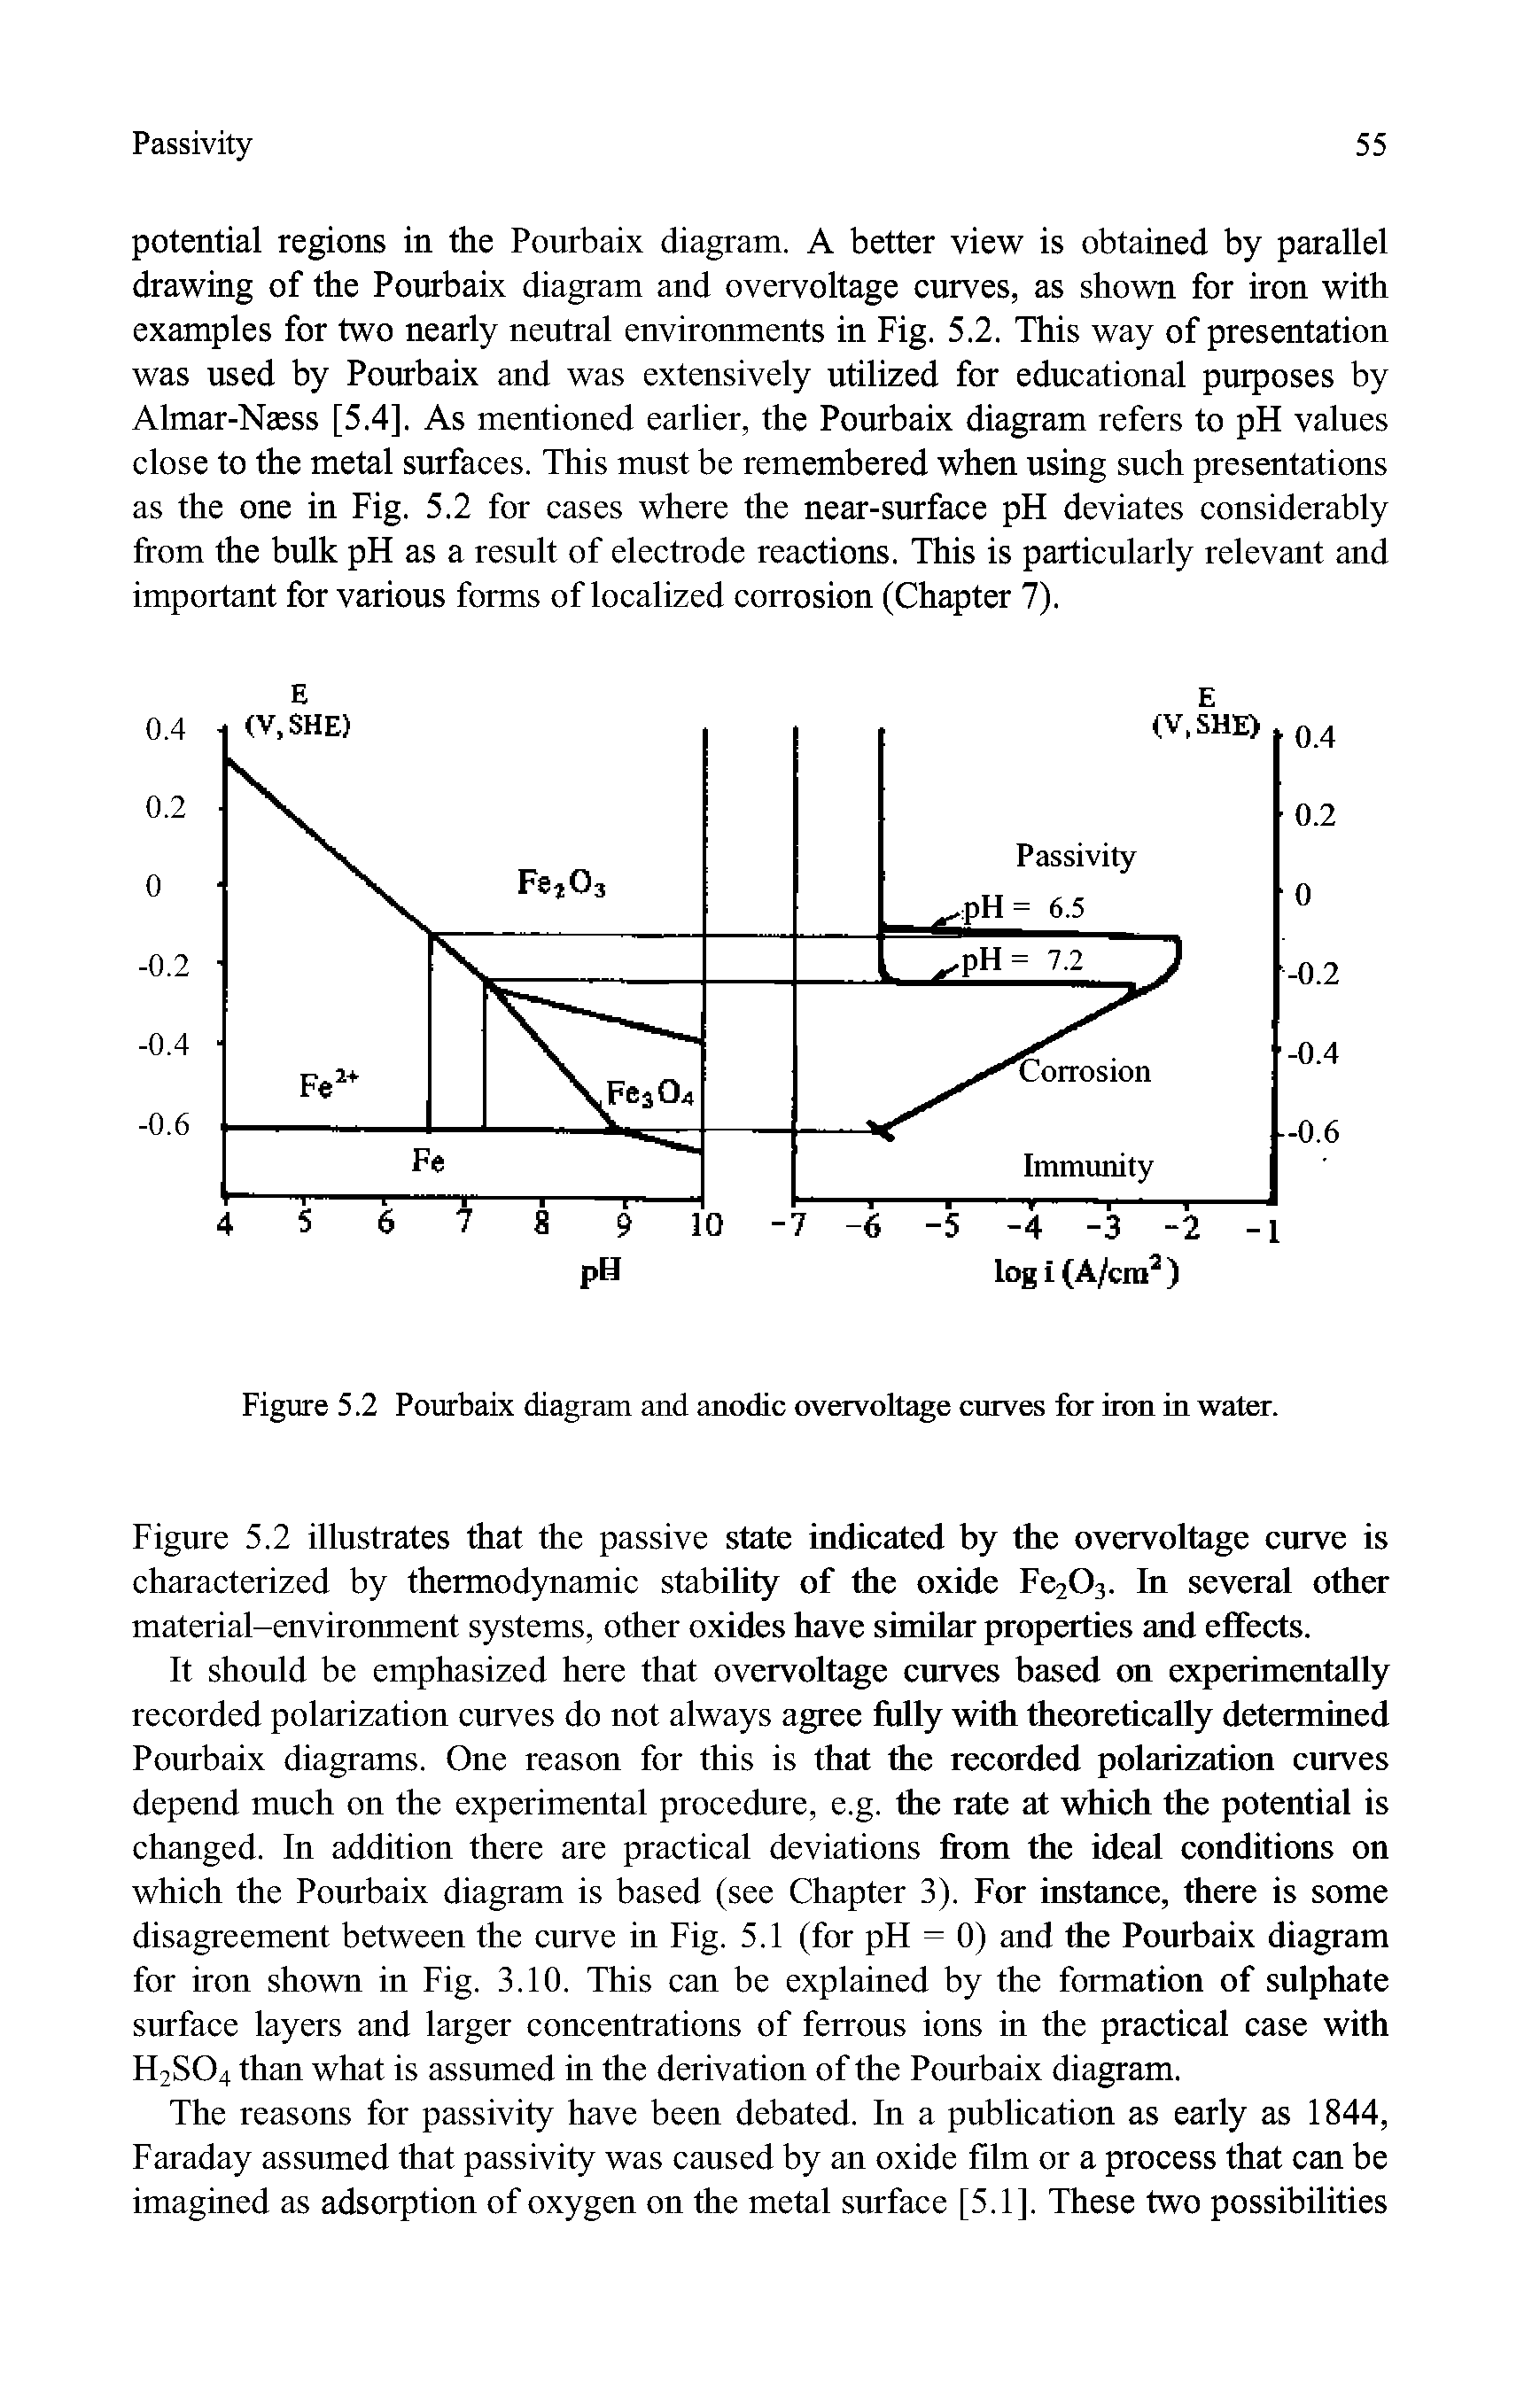 Figure 5.2 Pourbaix diagram and anodic overvoltage curves for iron in water.